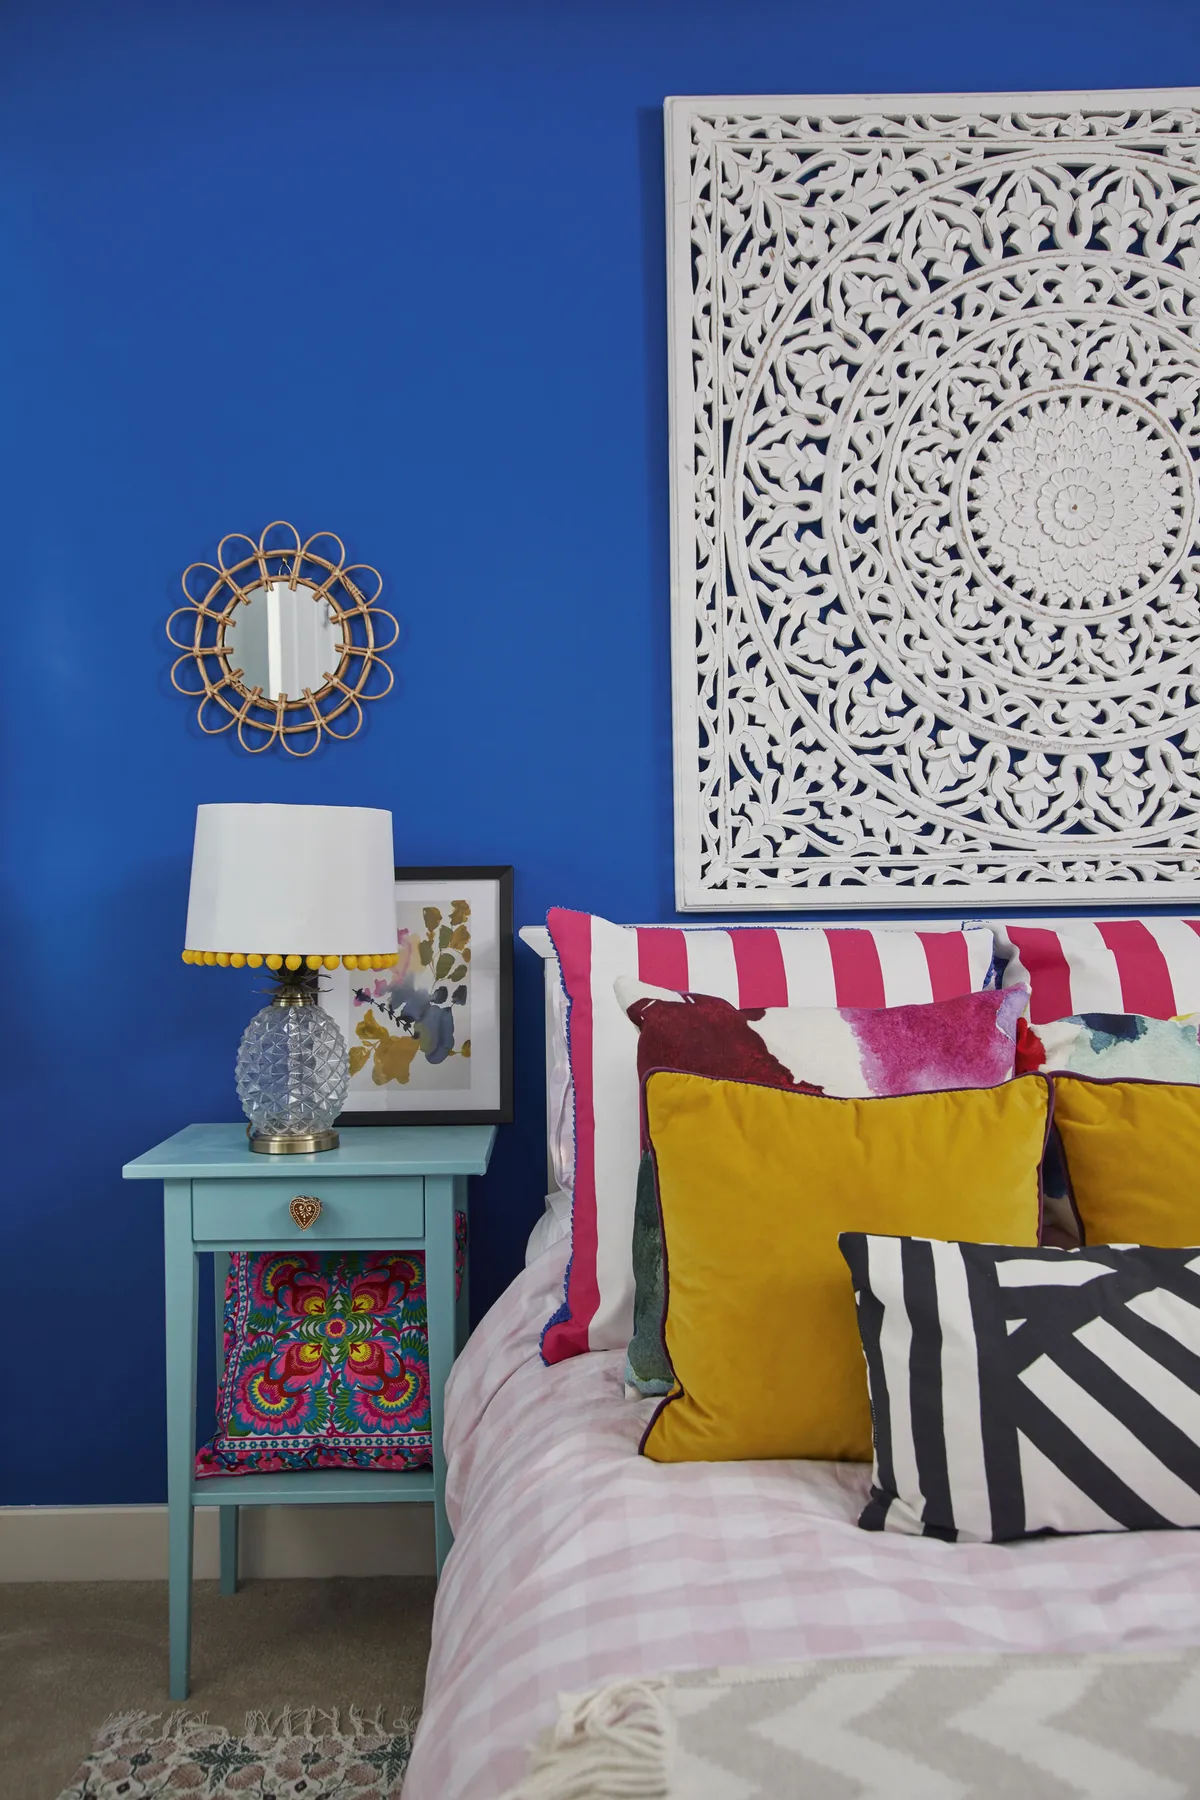 ‘I love a good clash of colour and pattern – no room is safe!’ says Sarah